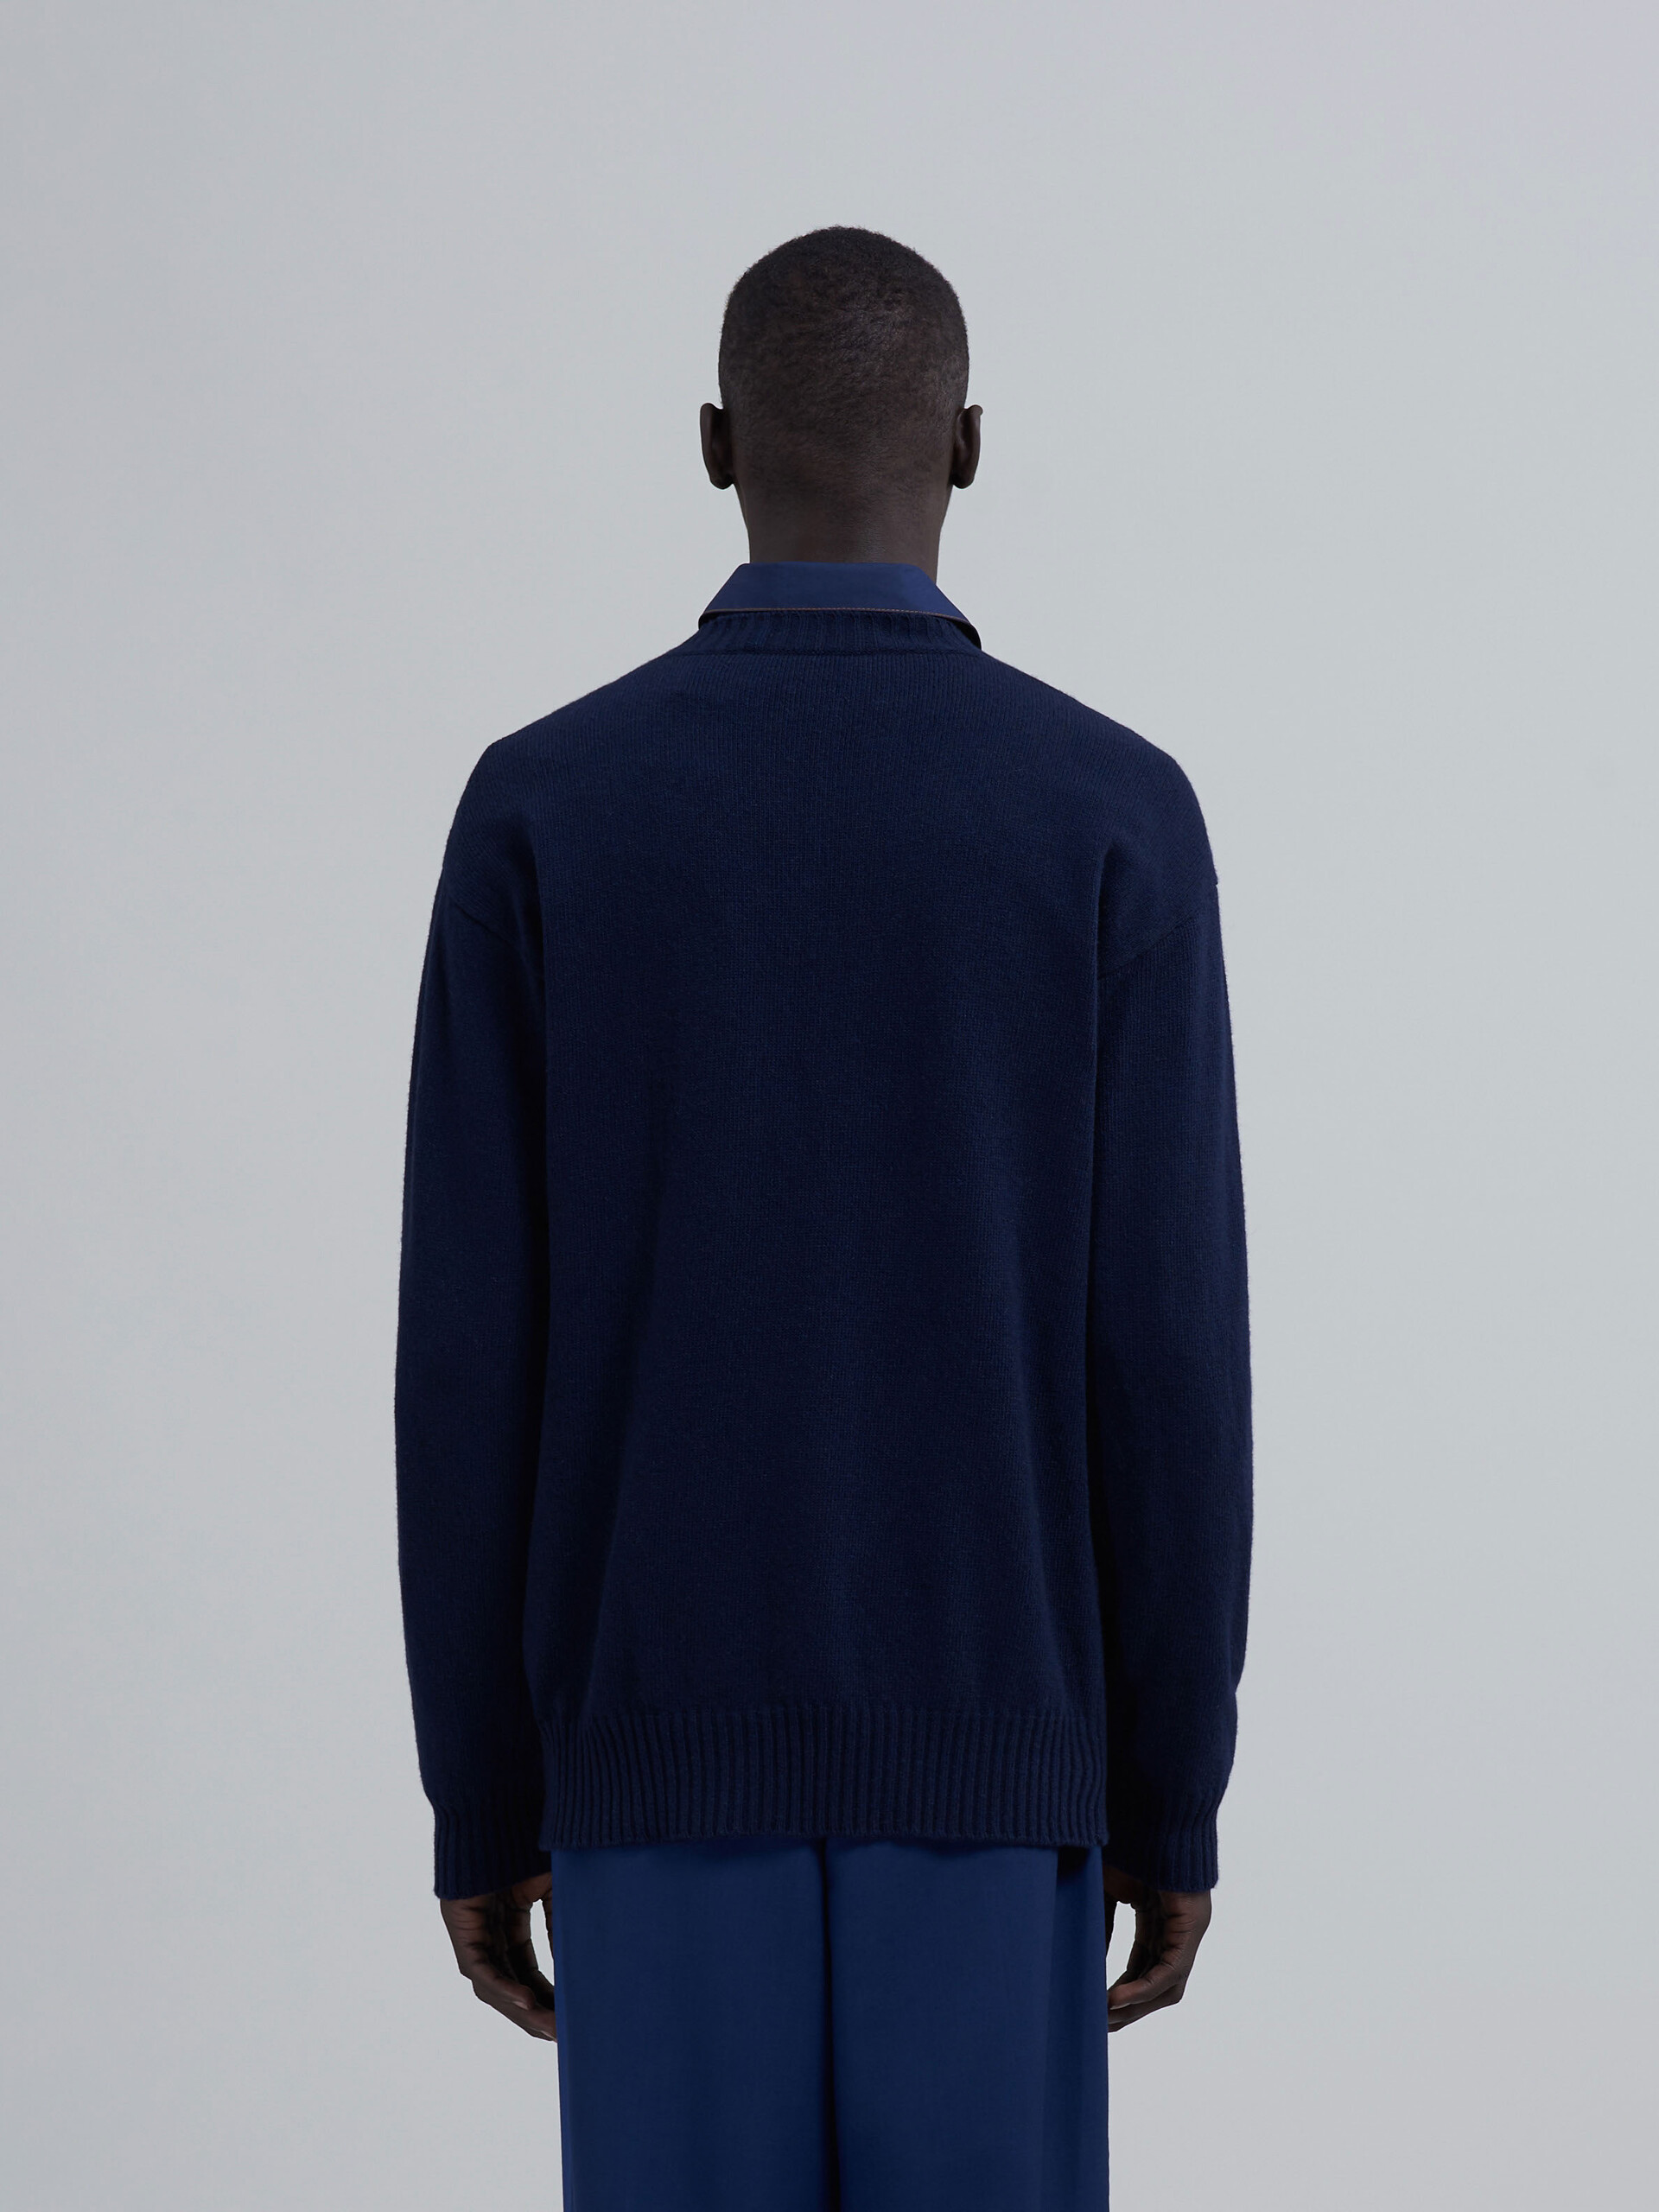 Blue black recycled cashmere sweater - Pullovers - Image 3